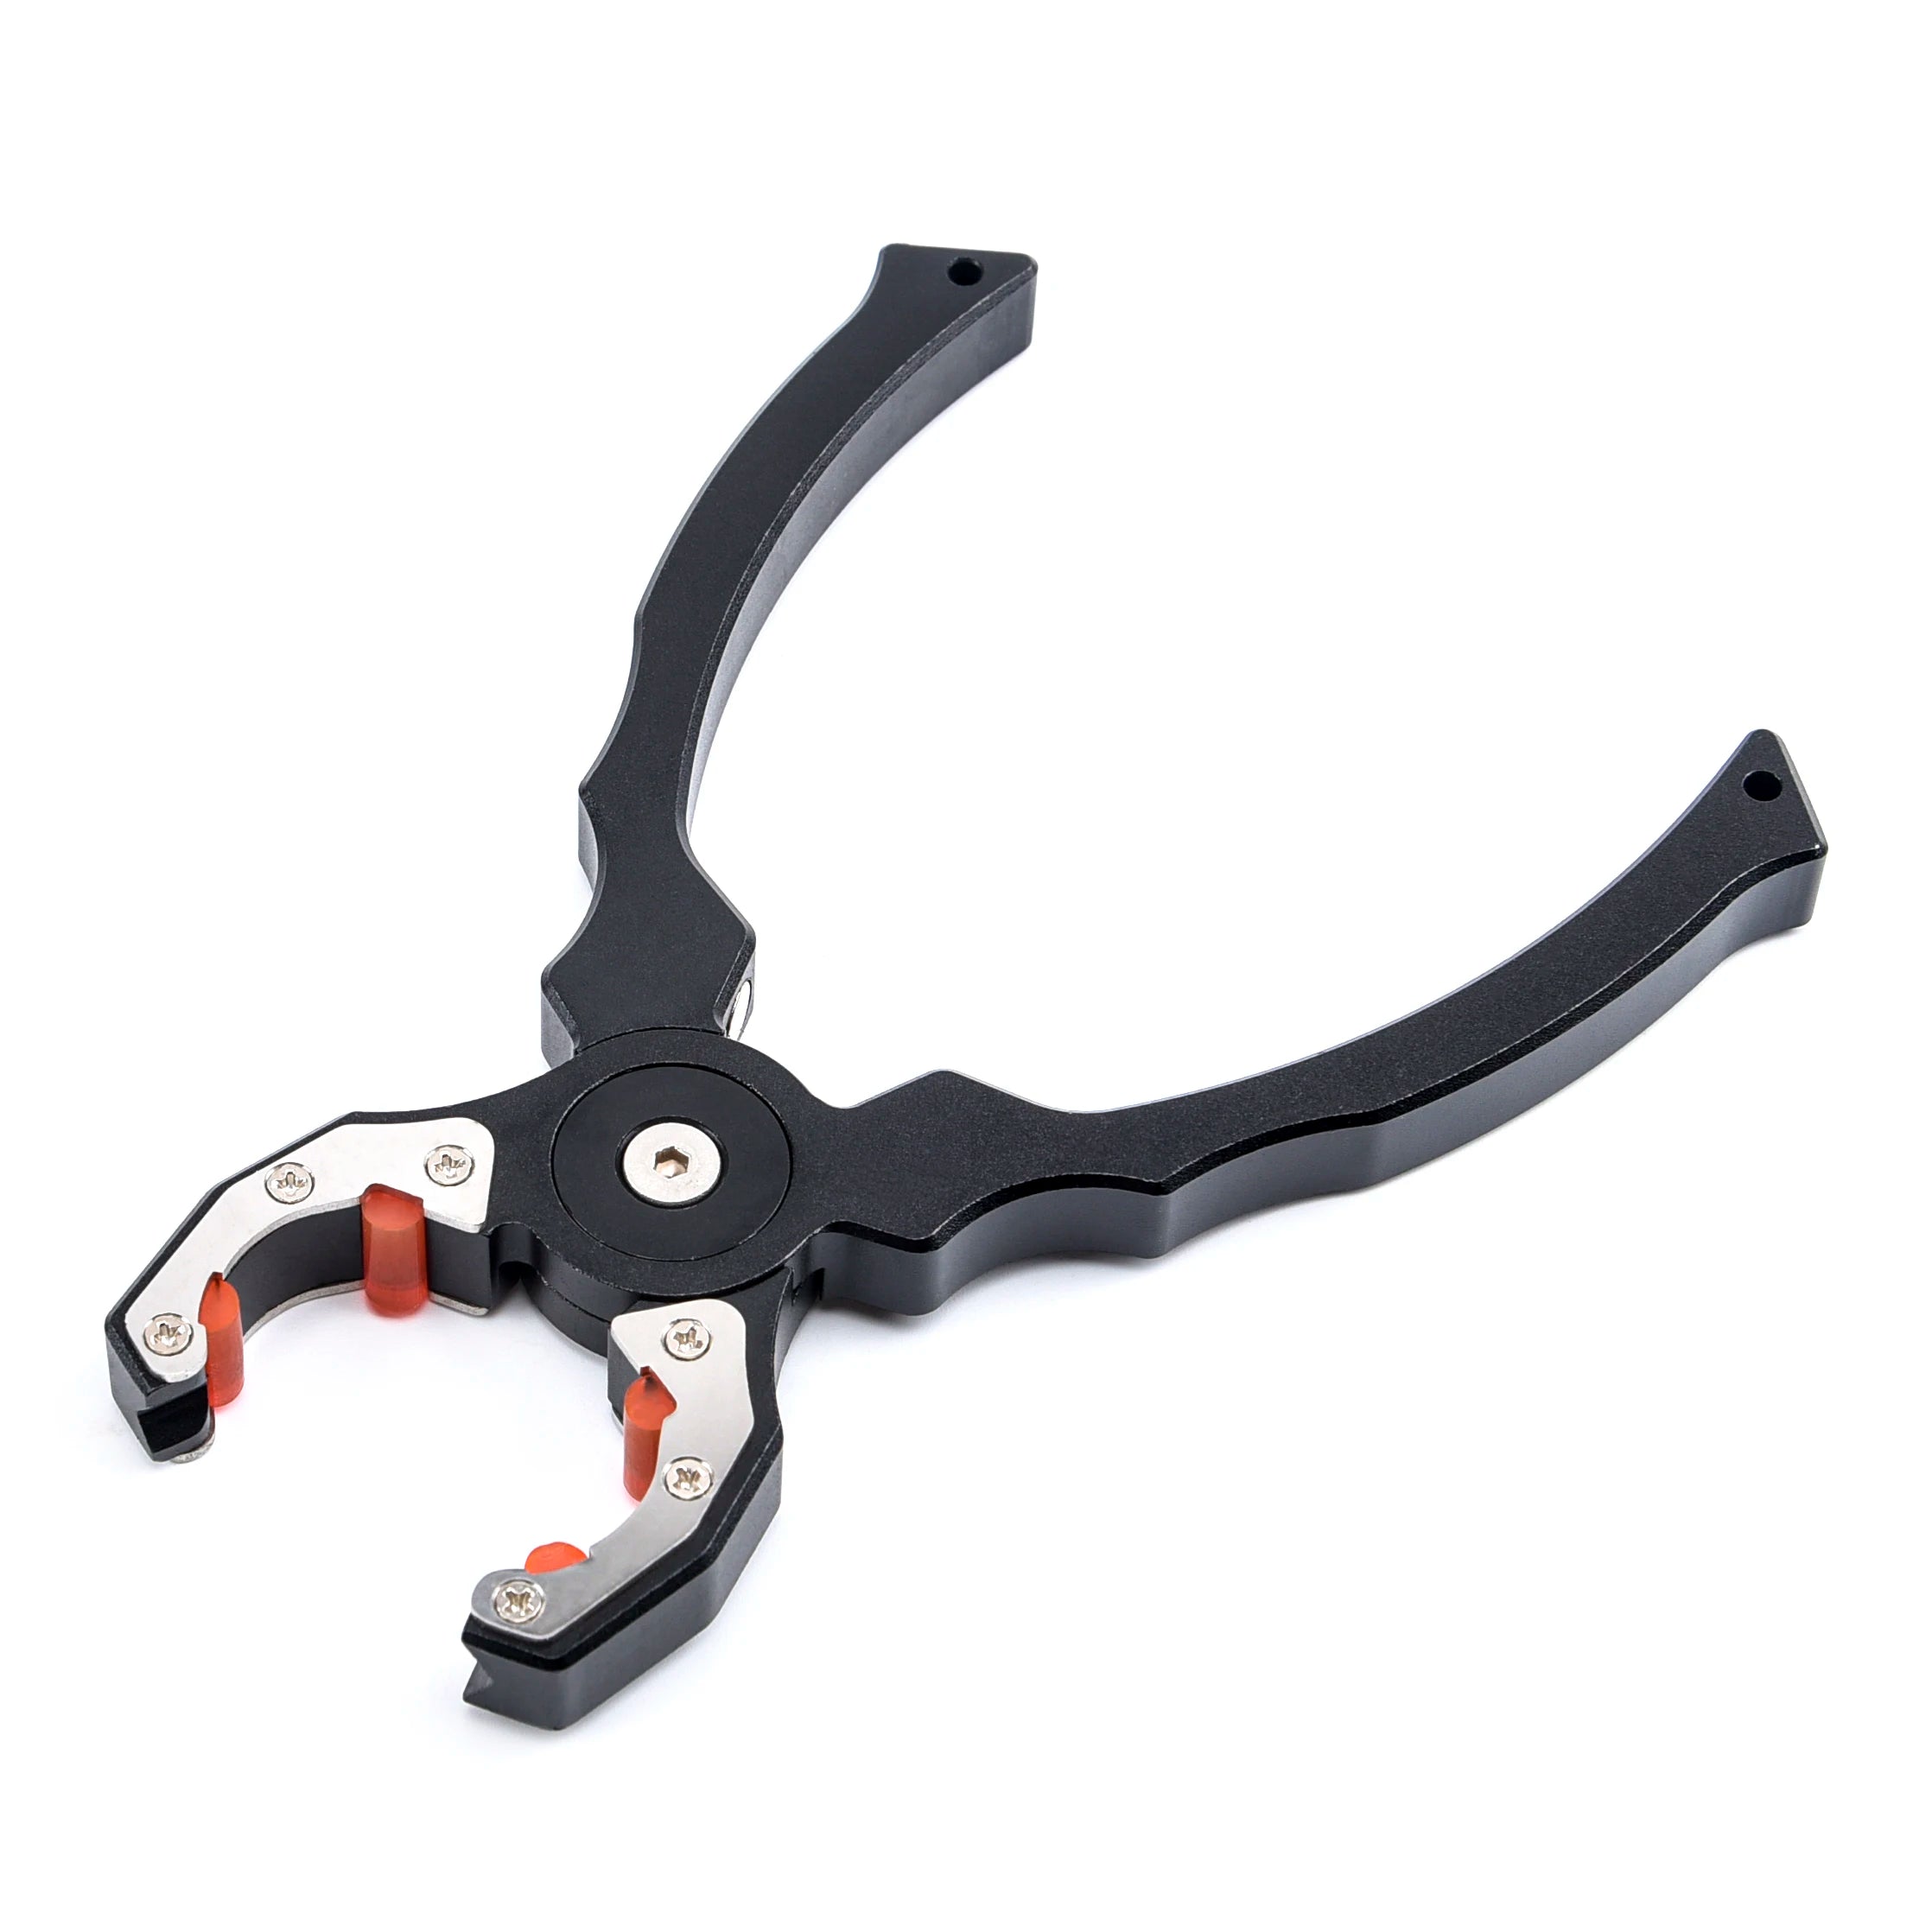 the shock shaft pliers can hold shock shafts firmly It can measure screw sizes It can